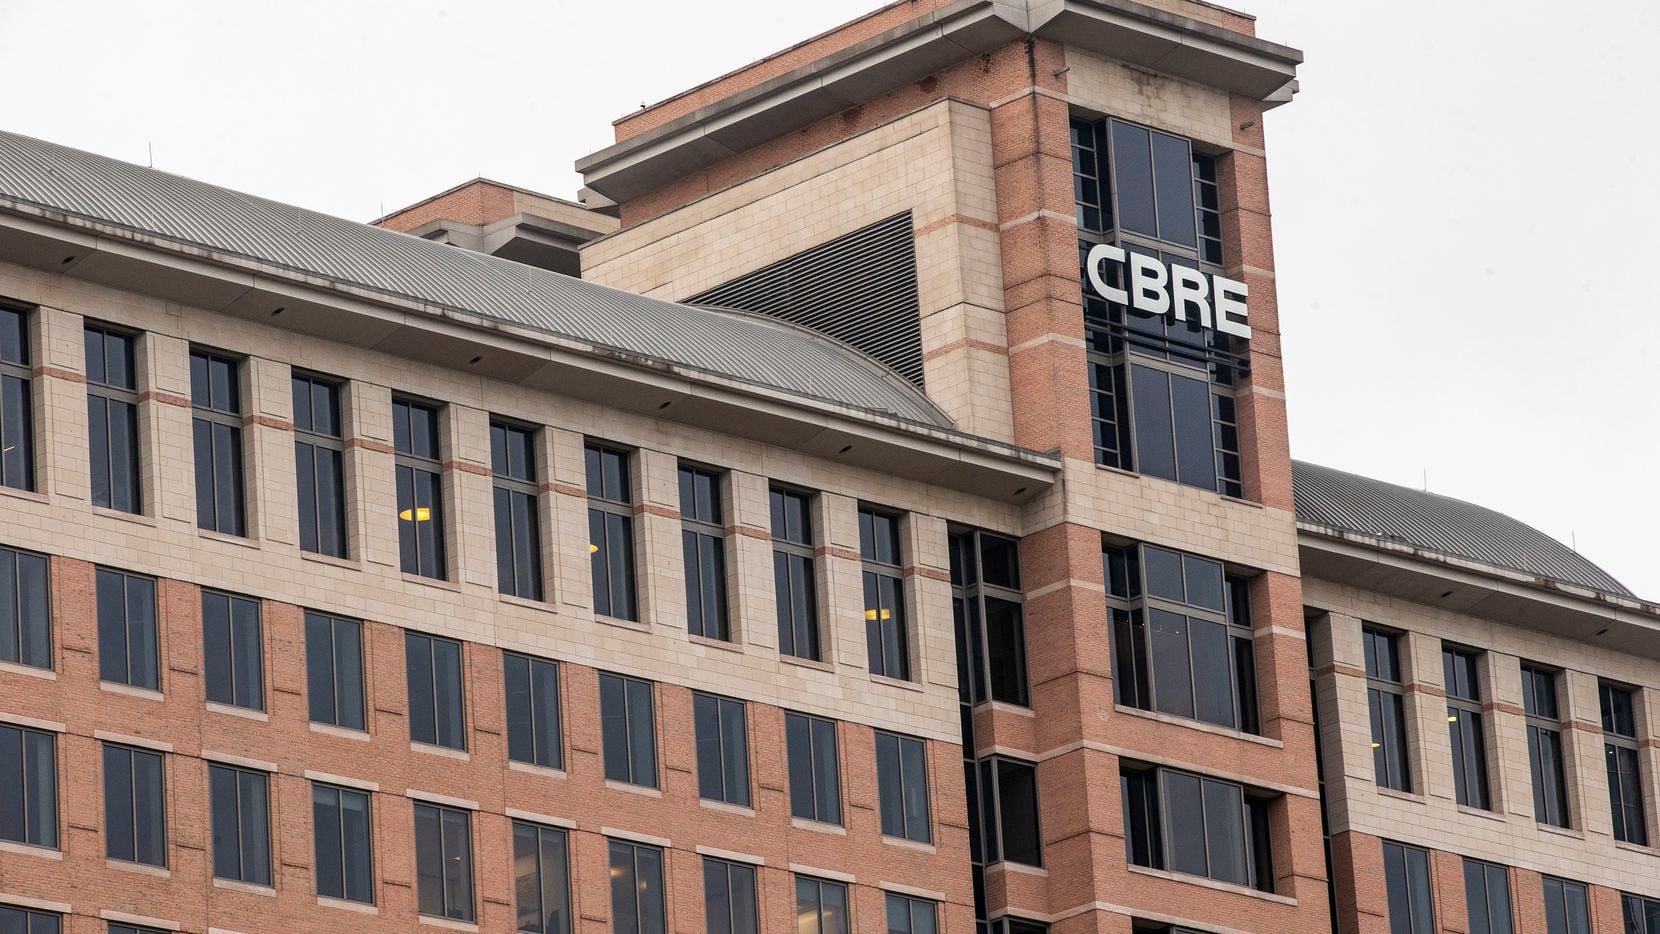 CBRE – which owns Dallas-based developer Trammell Crow Co. – had a 16% decline in sales...